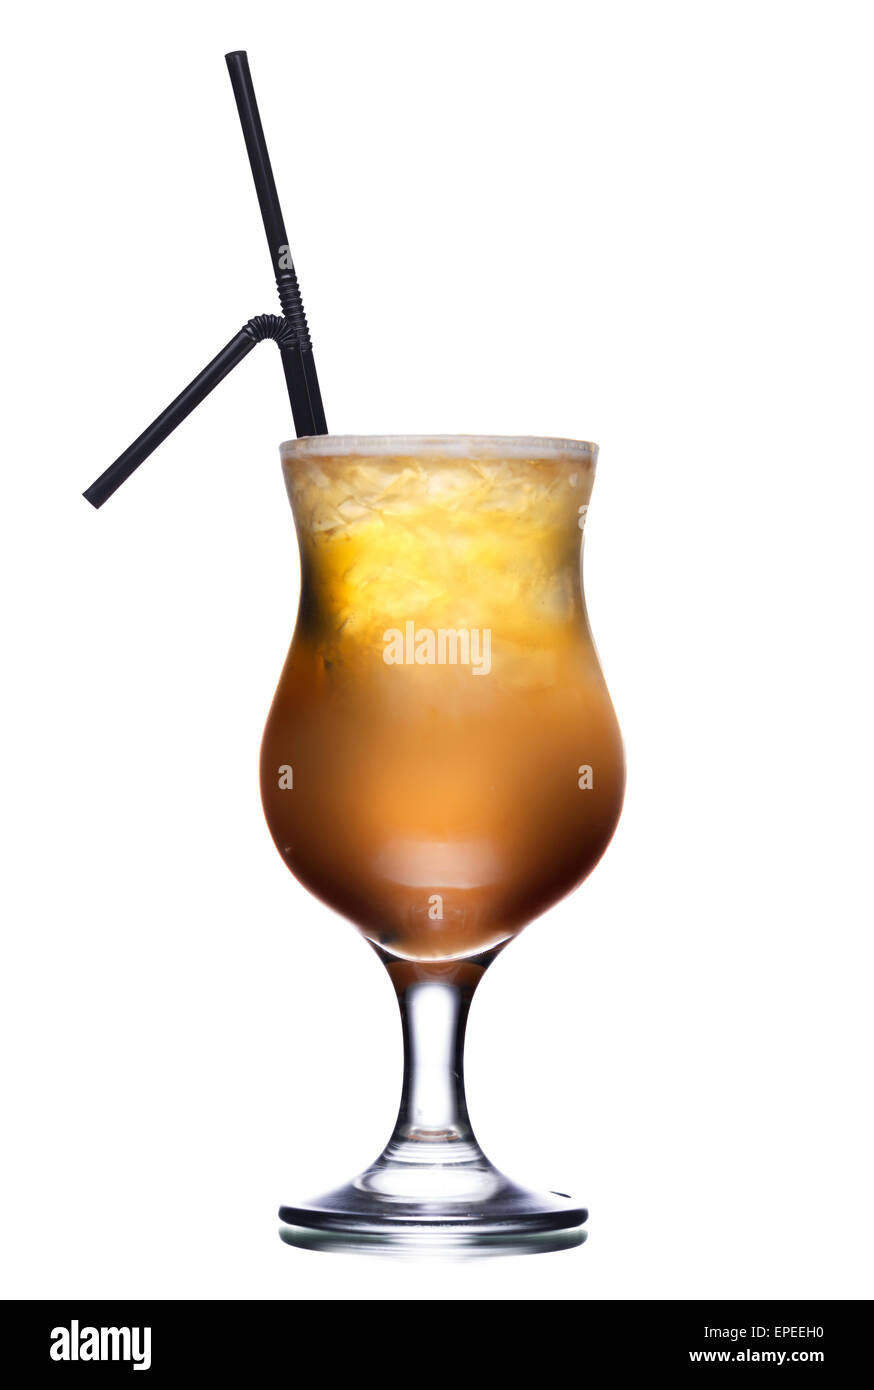 Alcohol cocktail with black straws Stock Photo